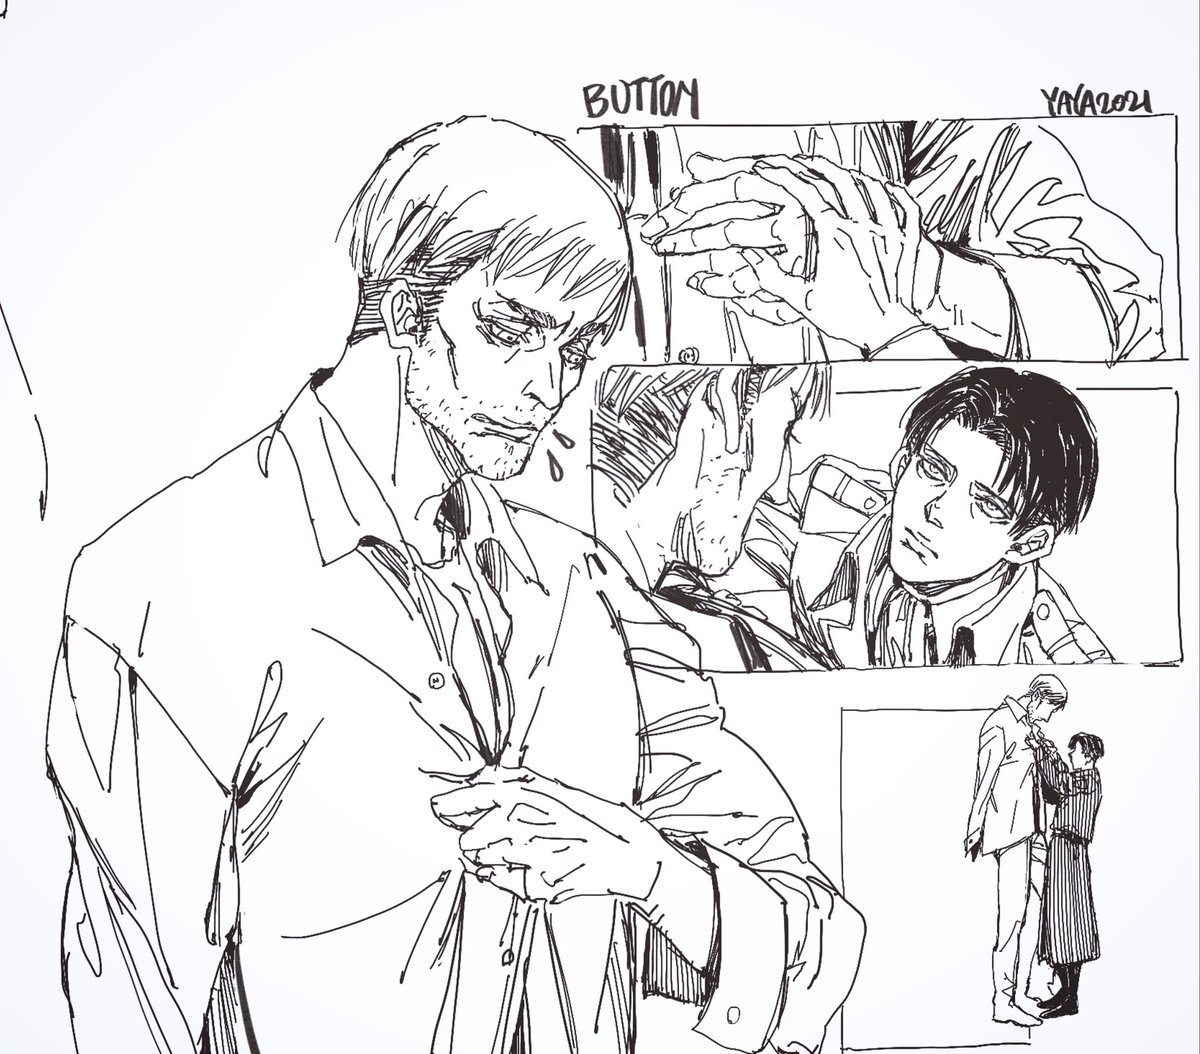 Although losing an arm seems didn't put a damn effect on Erwin in his daily routine, I'd like to consider that it do cause some frustration in the beginning #eruri #エルリ 